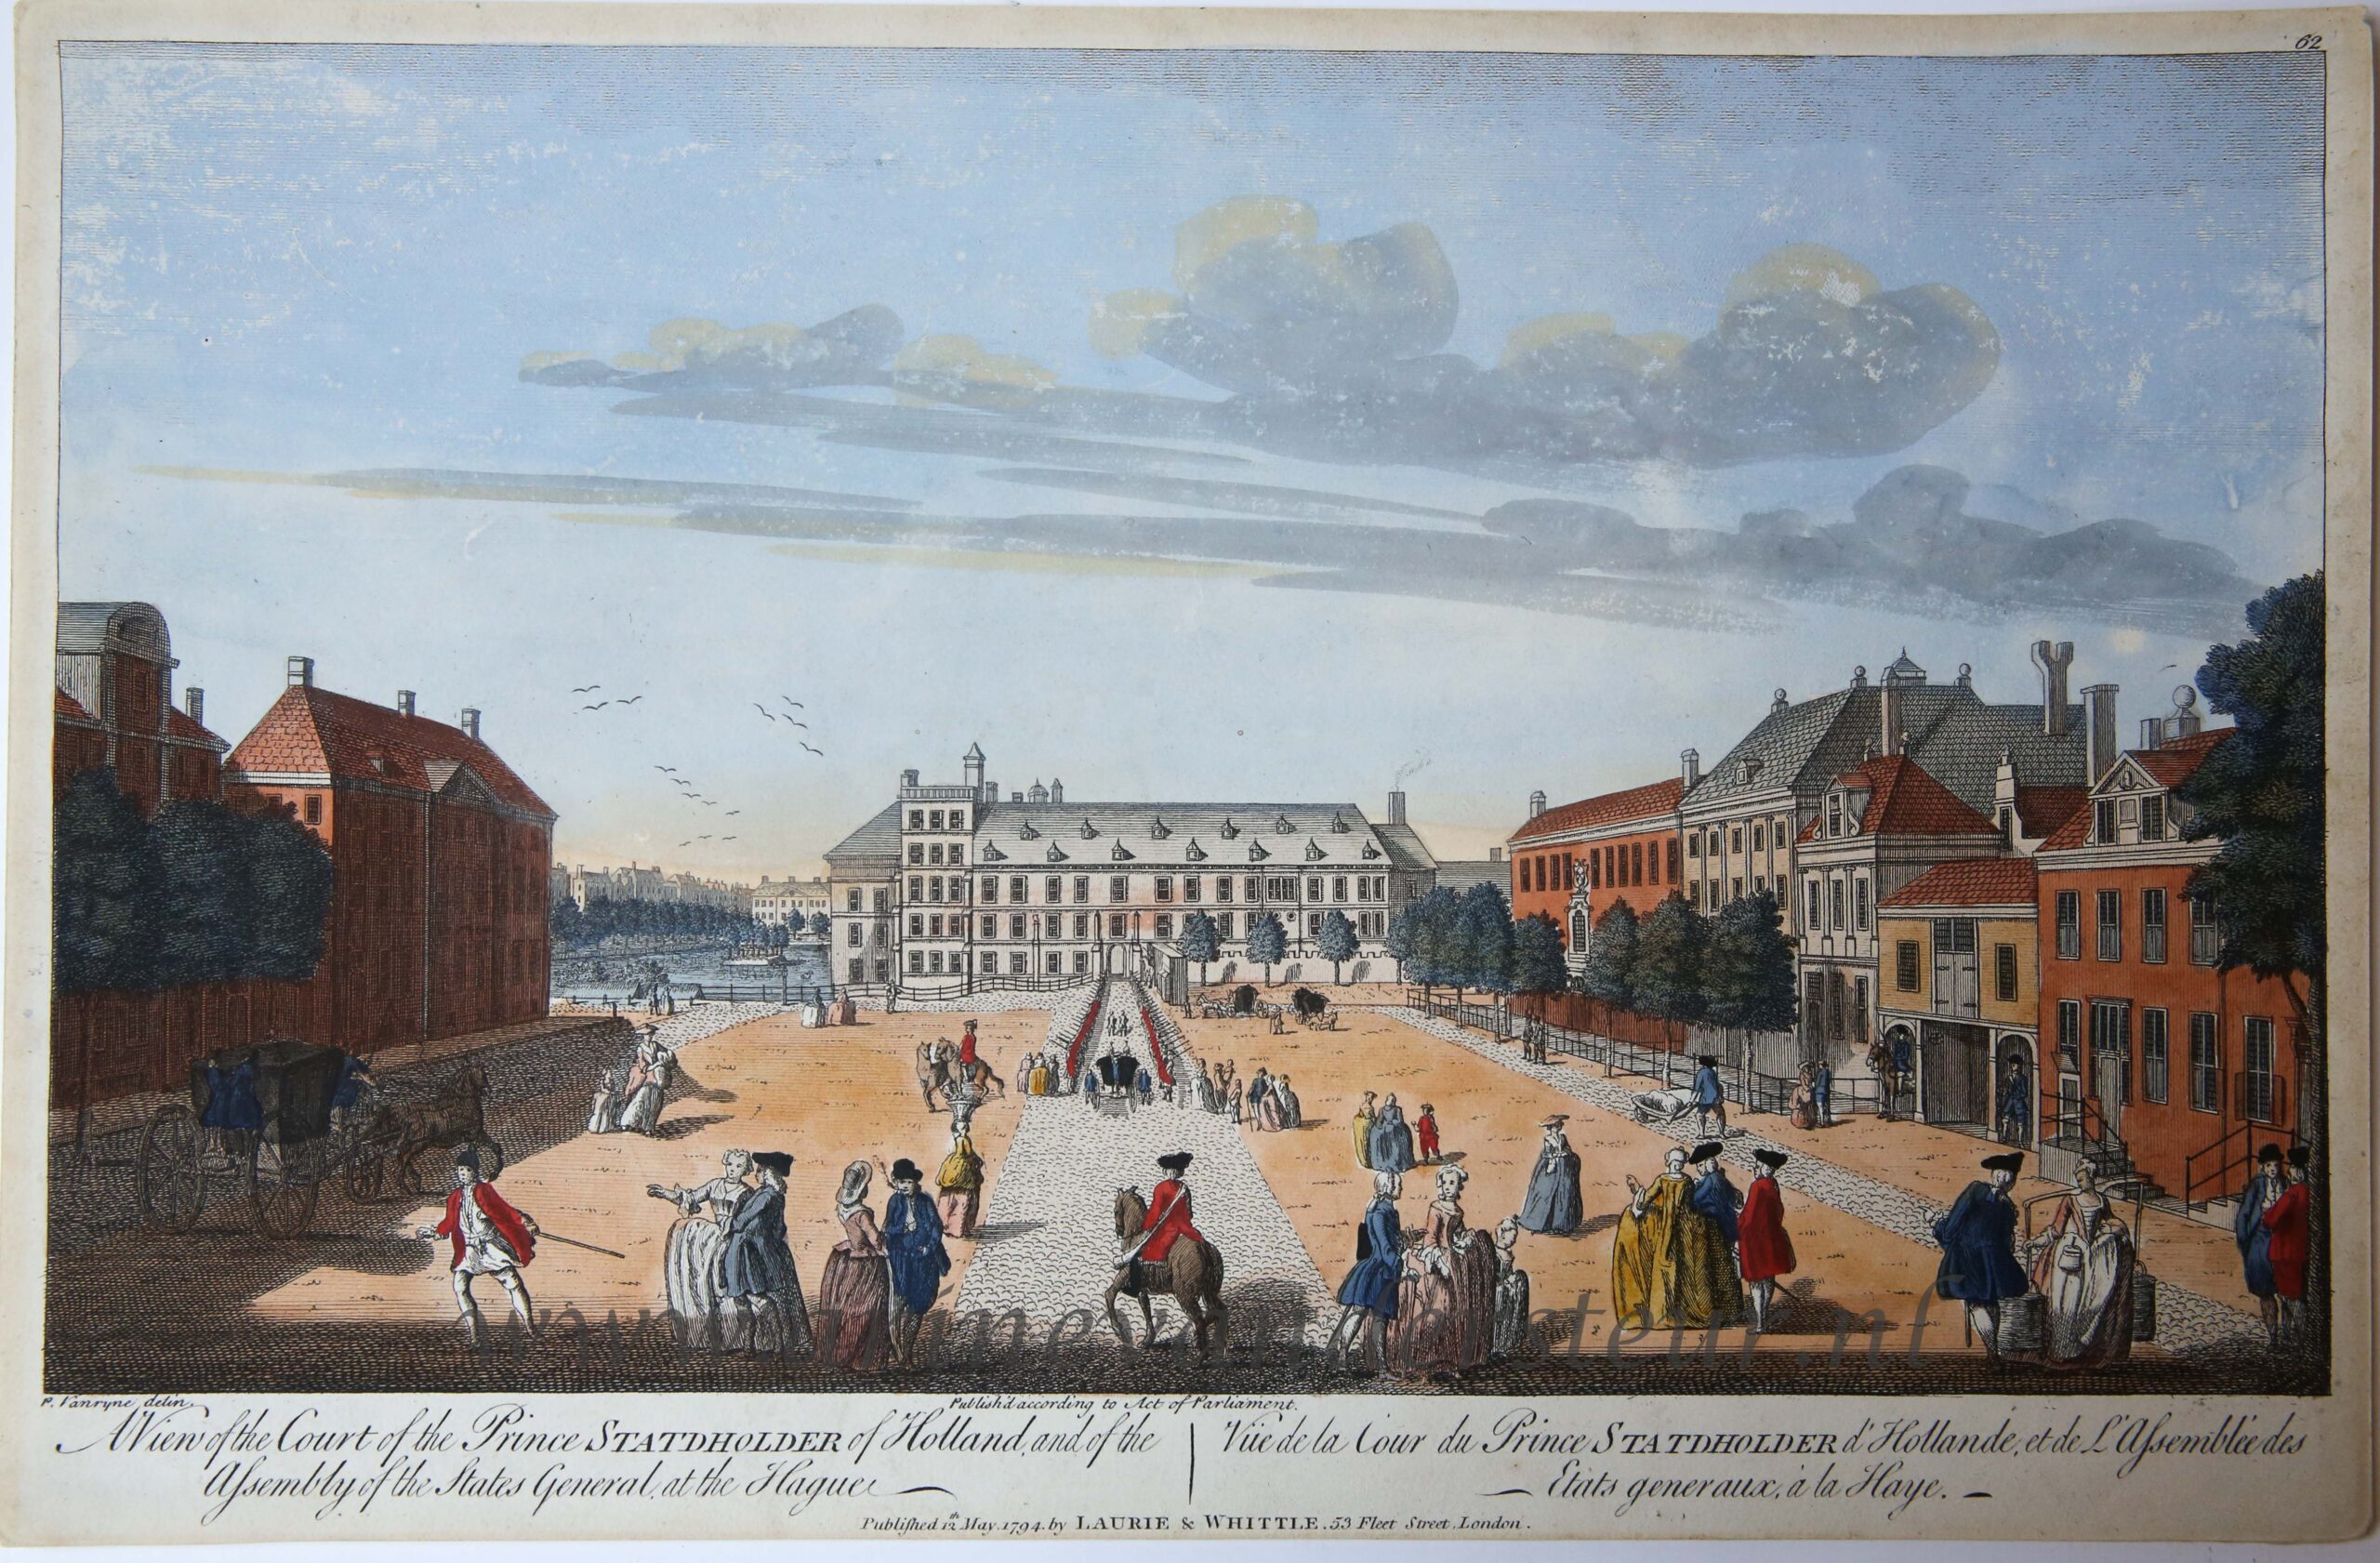 [Handcolored optical view, The Hague] A View of the Court of the Prince Statholder of Holland, and of the Assembly of the States General, at the Hague, published 1794.